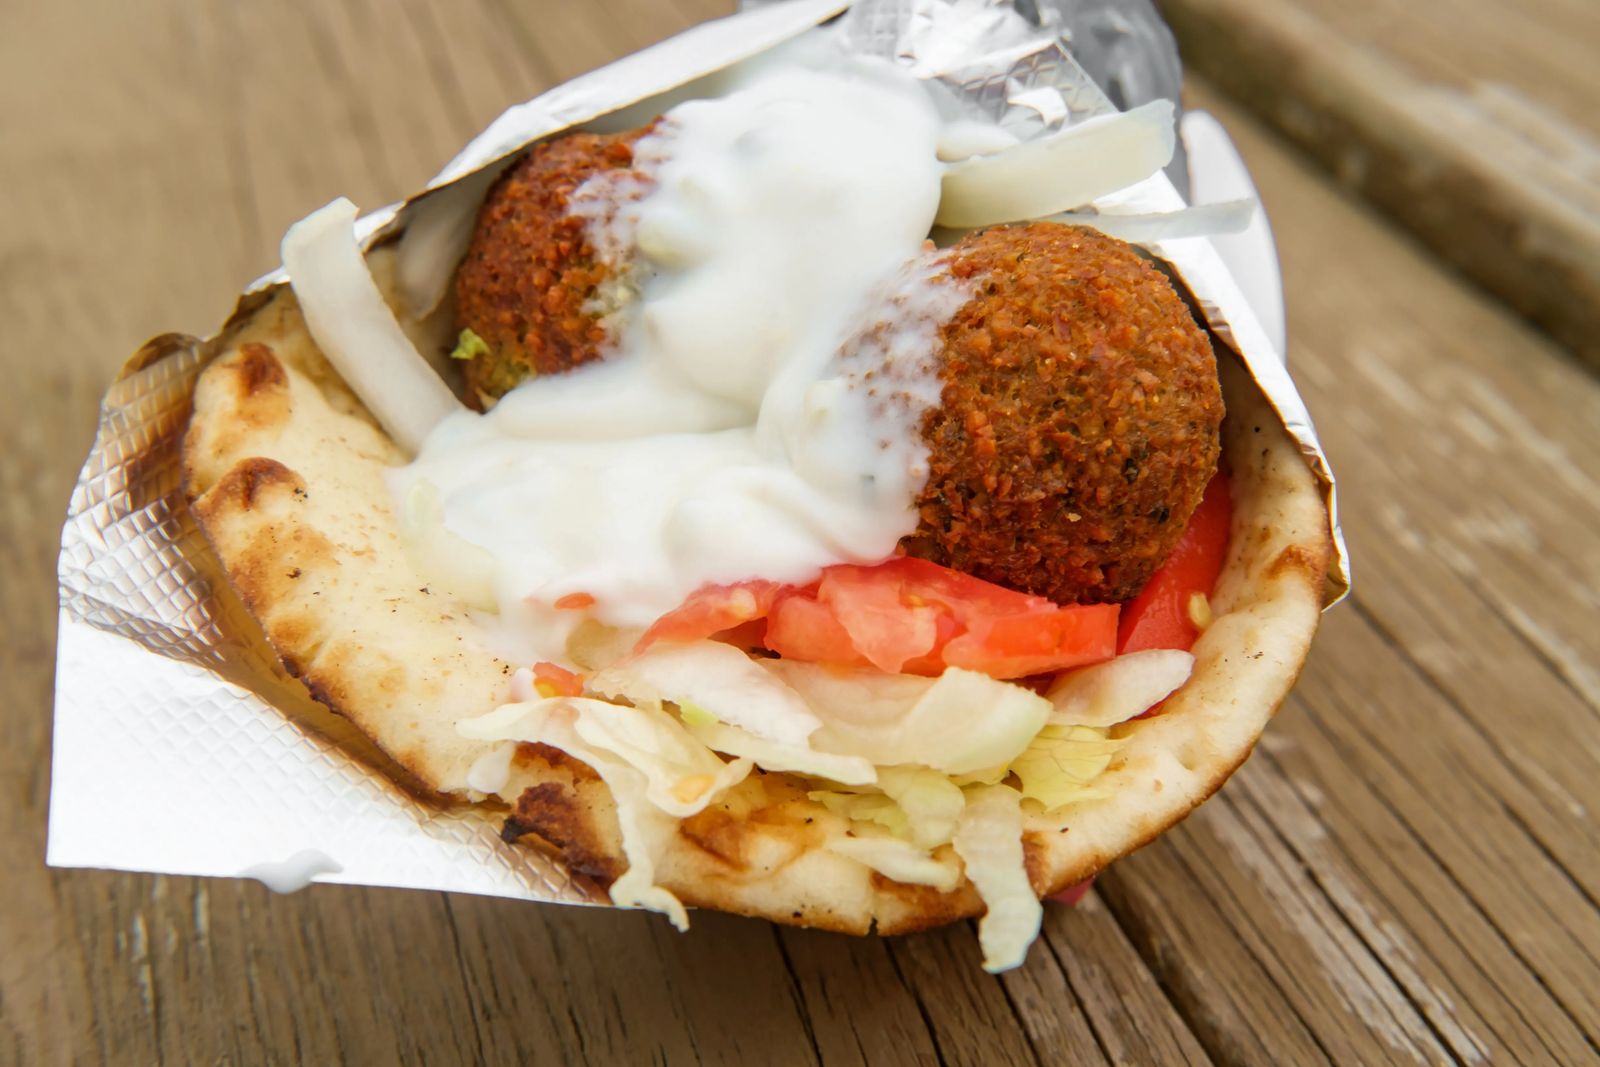 Fresh and healthy falafel with tzatziki tomato red onion and iceberg lettuce in pita bread